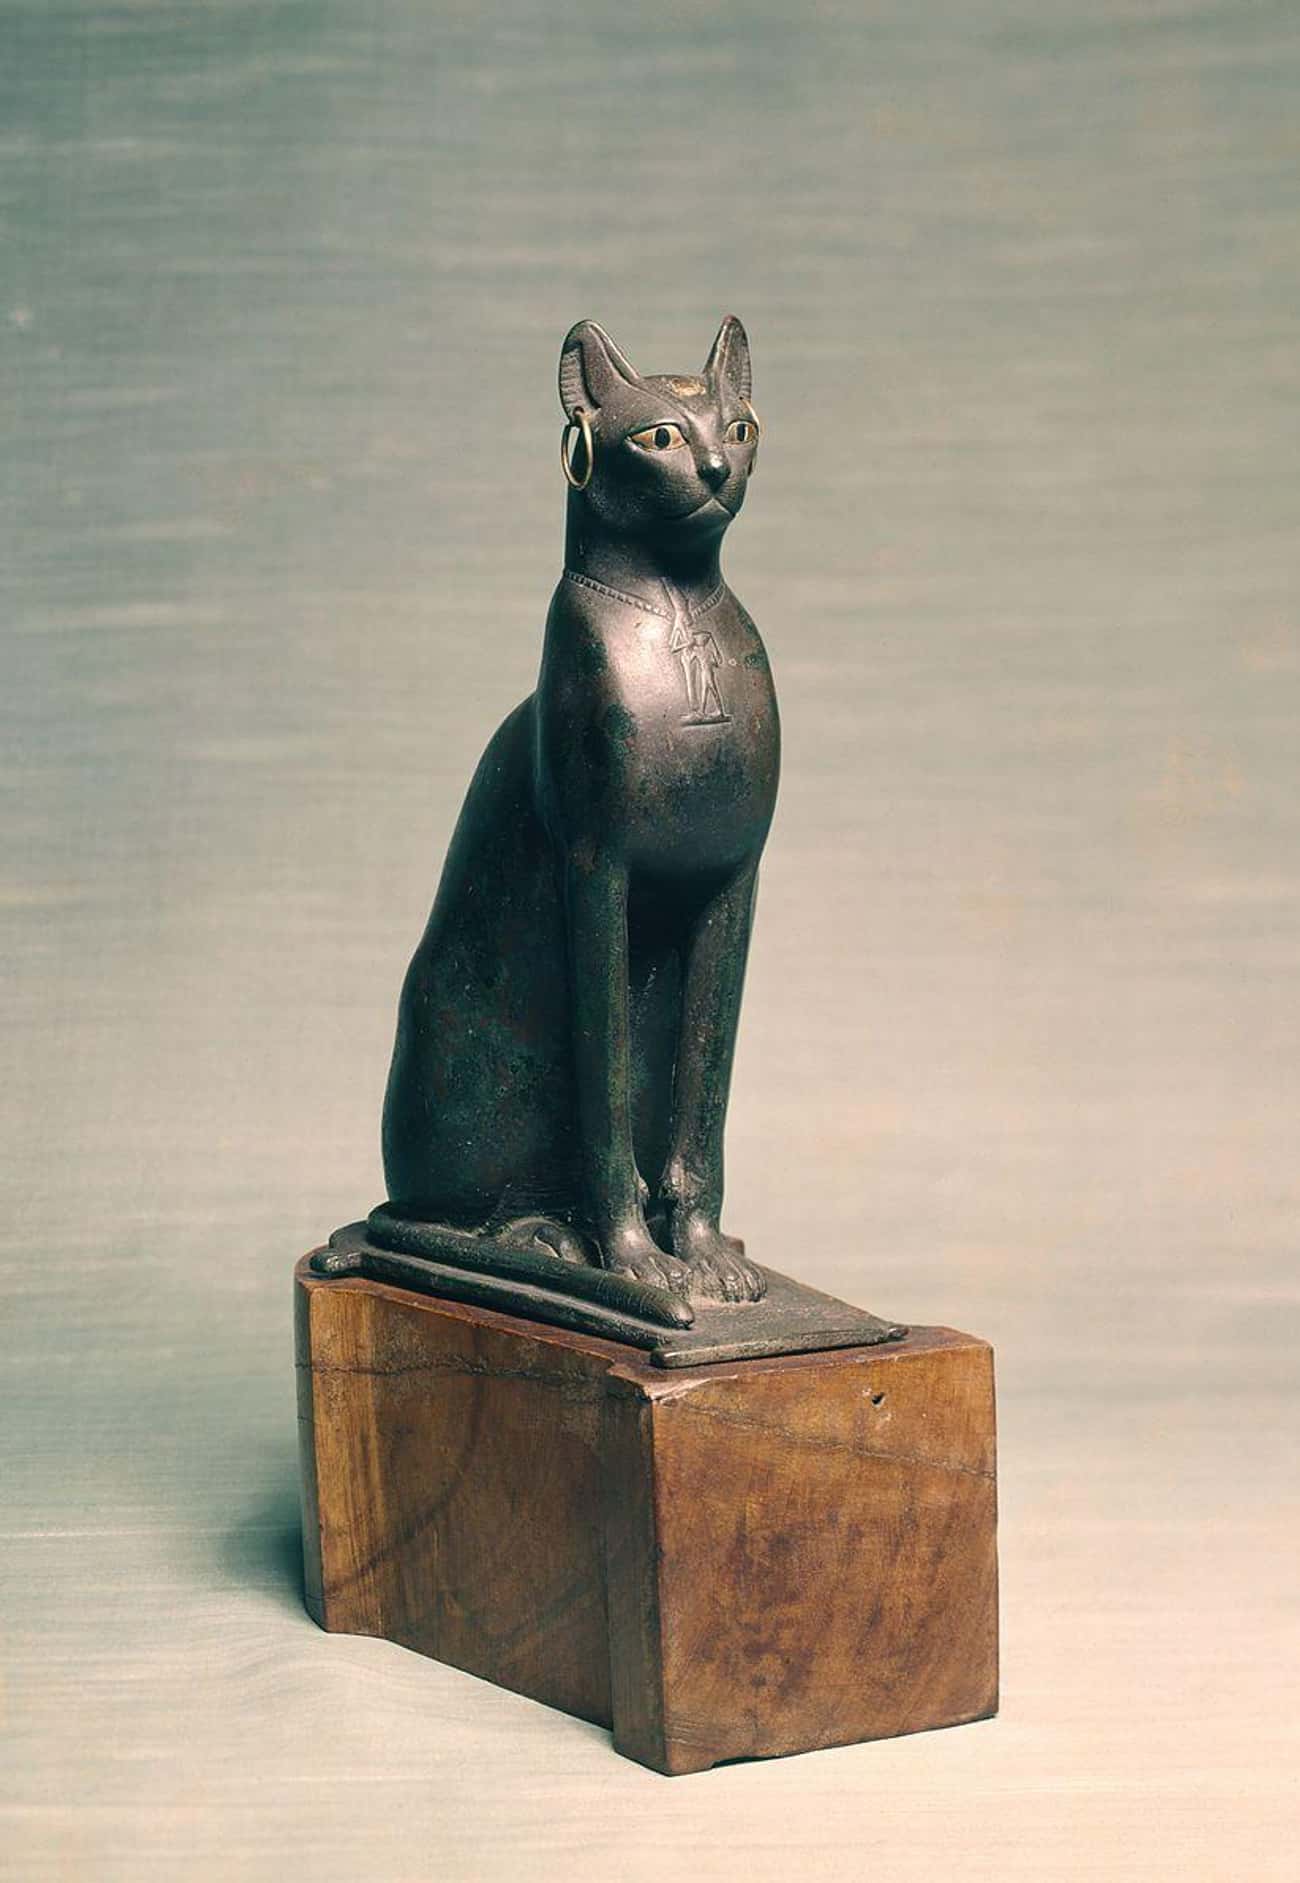 Persians Used Cats To Force Egyptians To Surrender